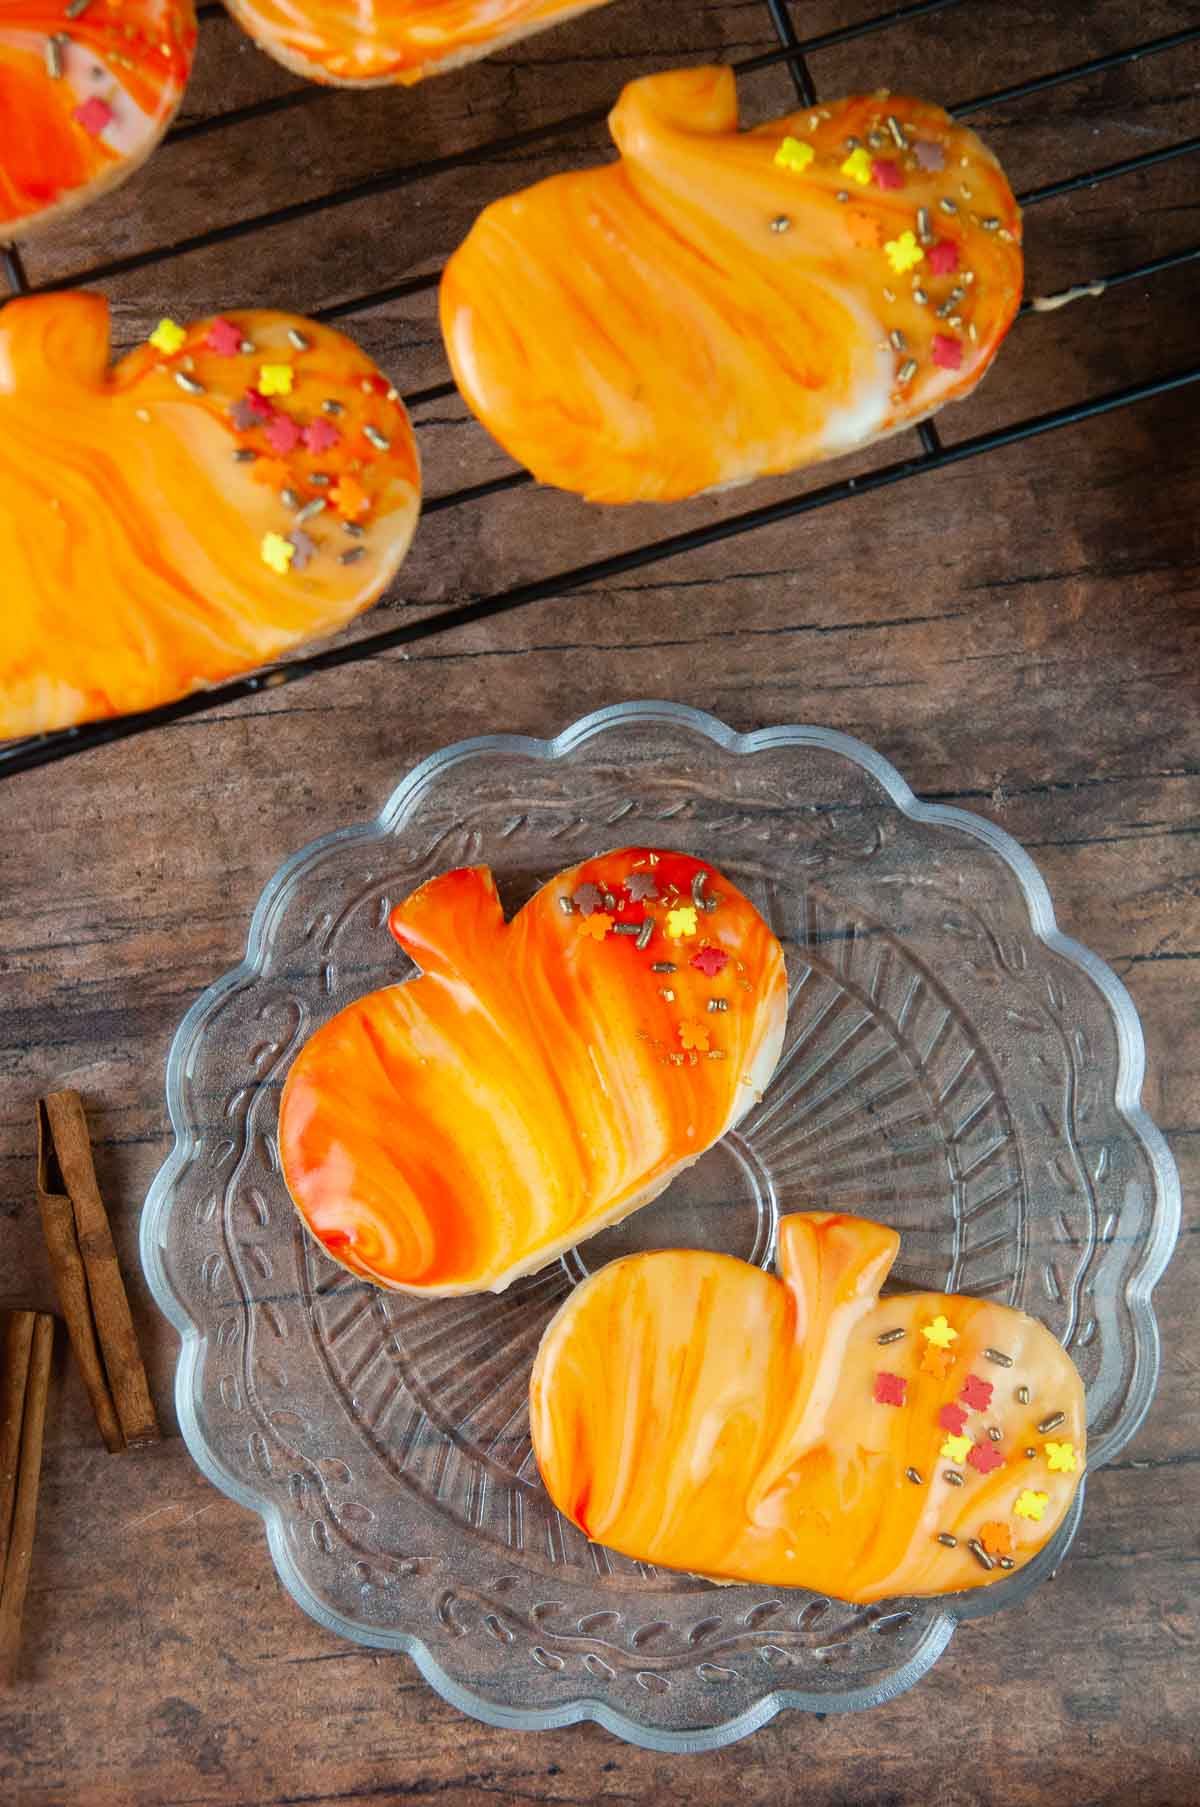 Marbled icing and sprinkles is an easy way to decorate pumpkin spice cut out cookies.